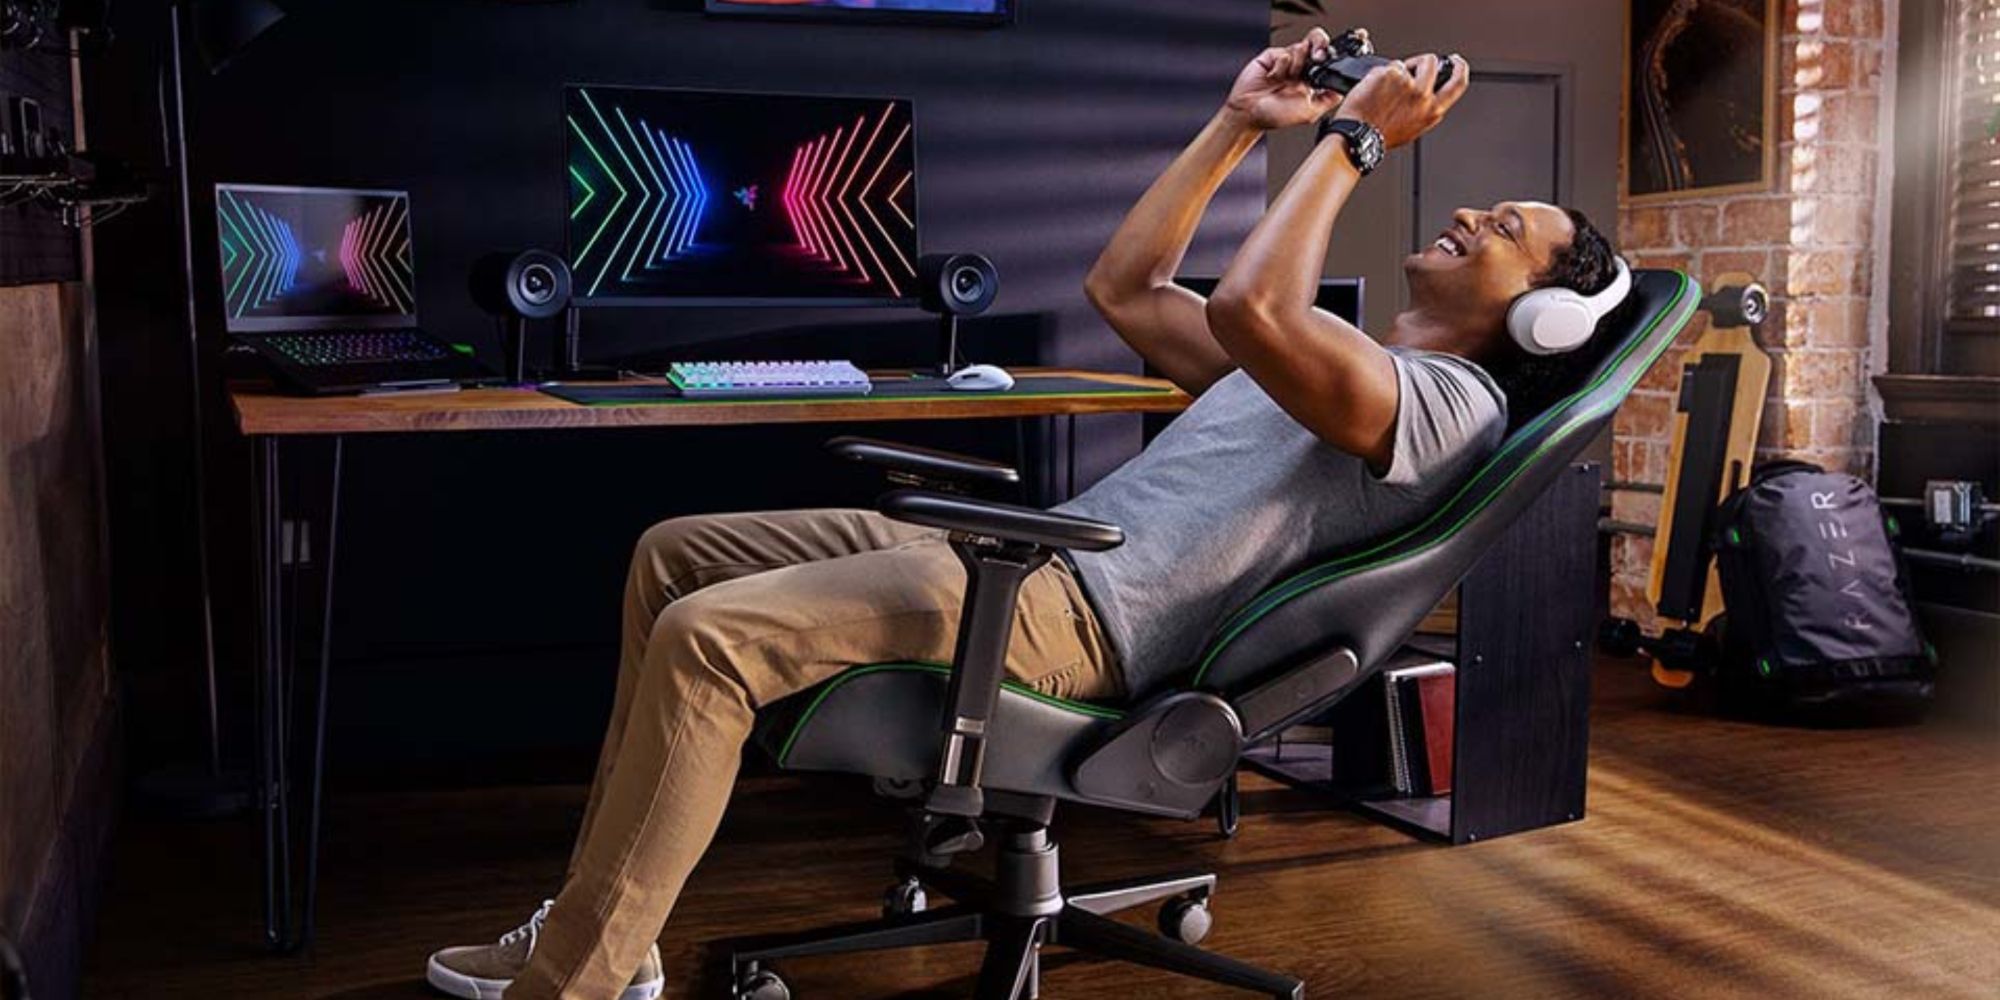 gamer leaning back in a gaming chair